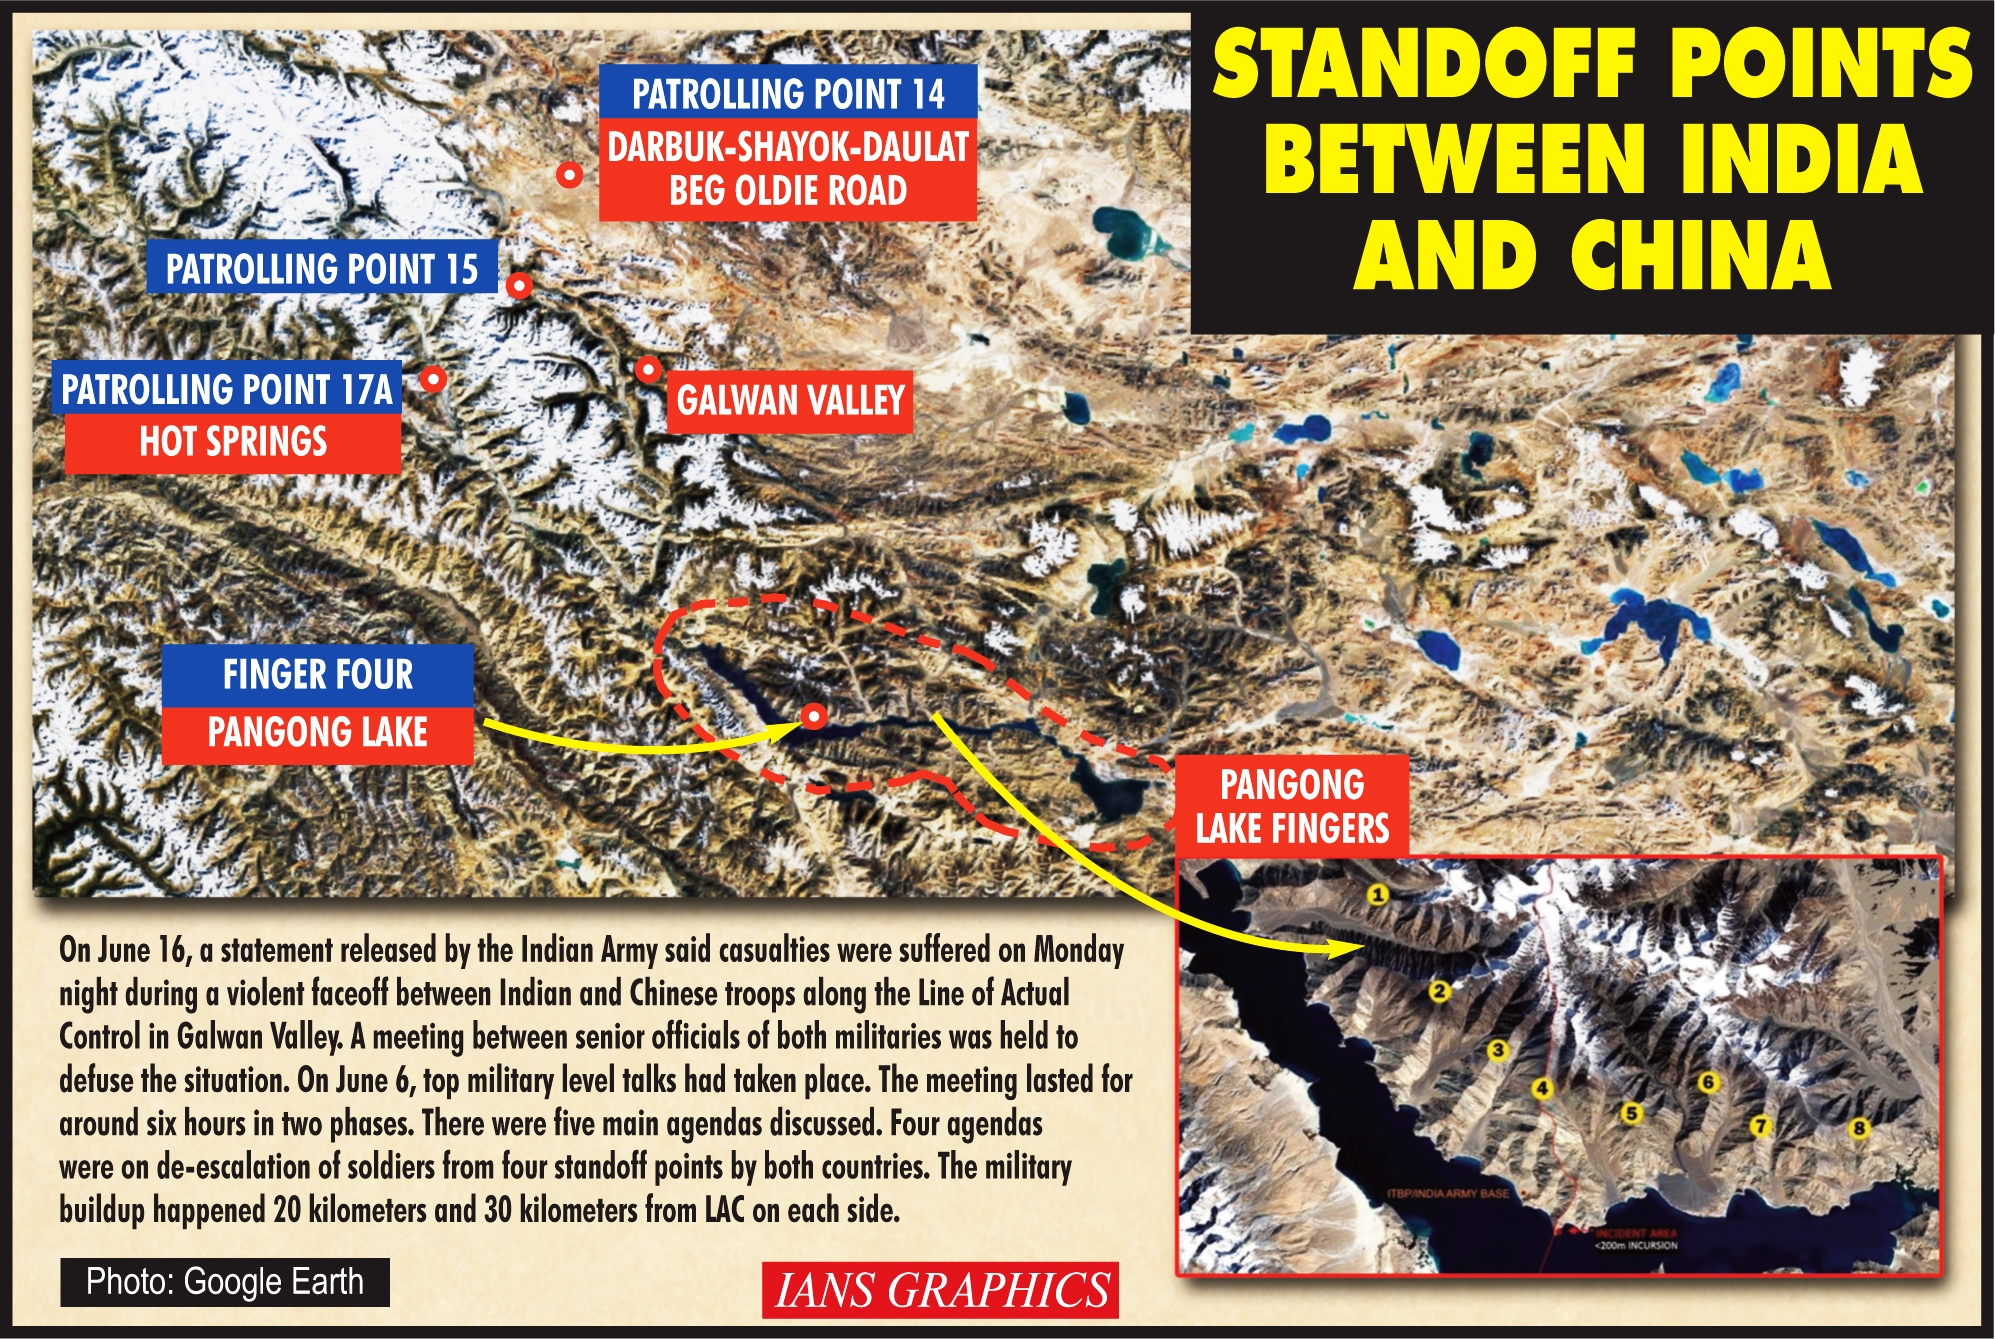 Standoff points between India and China